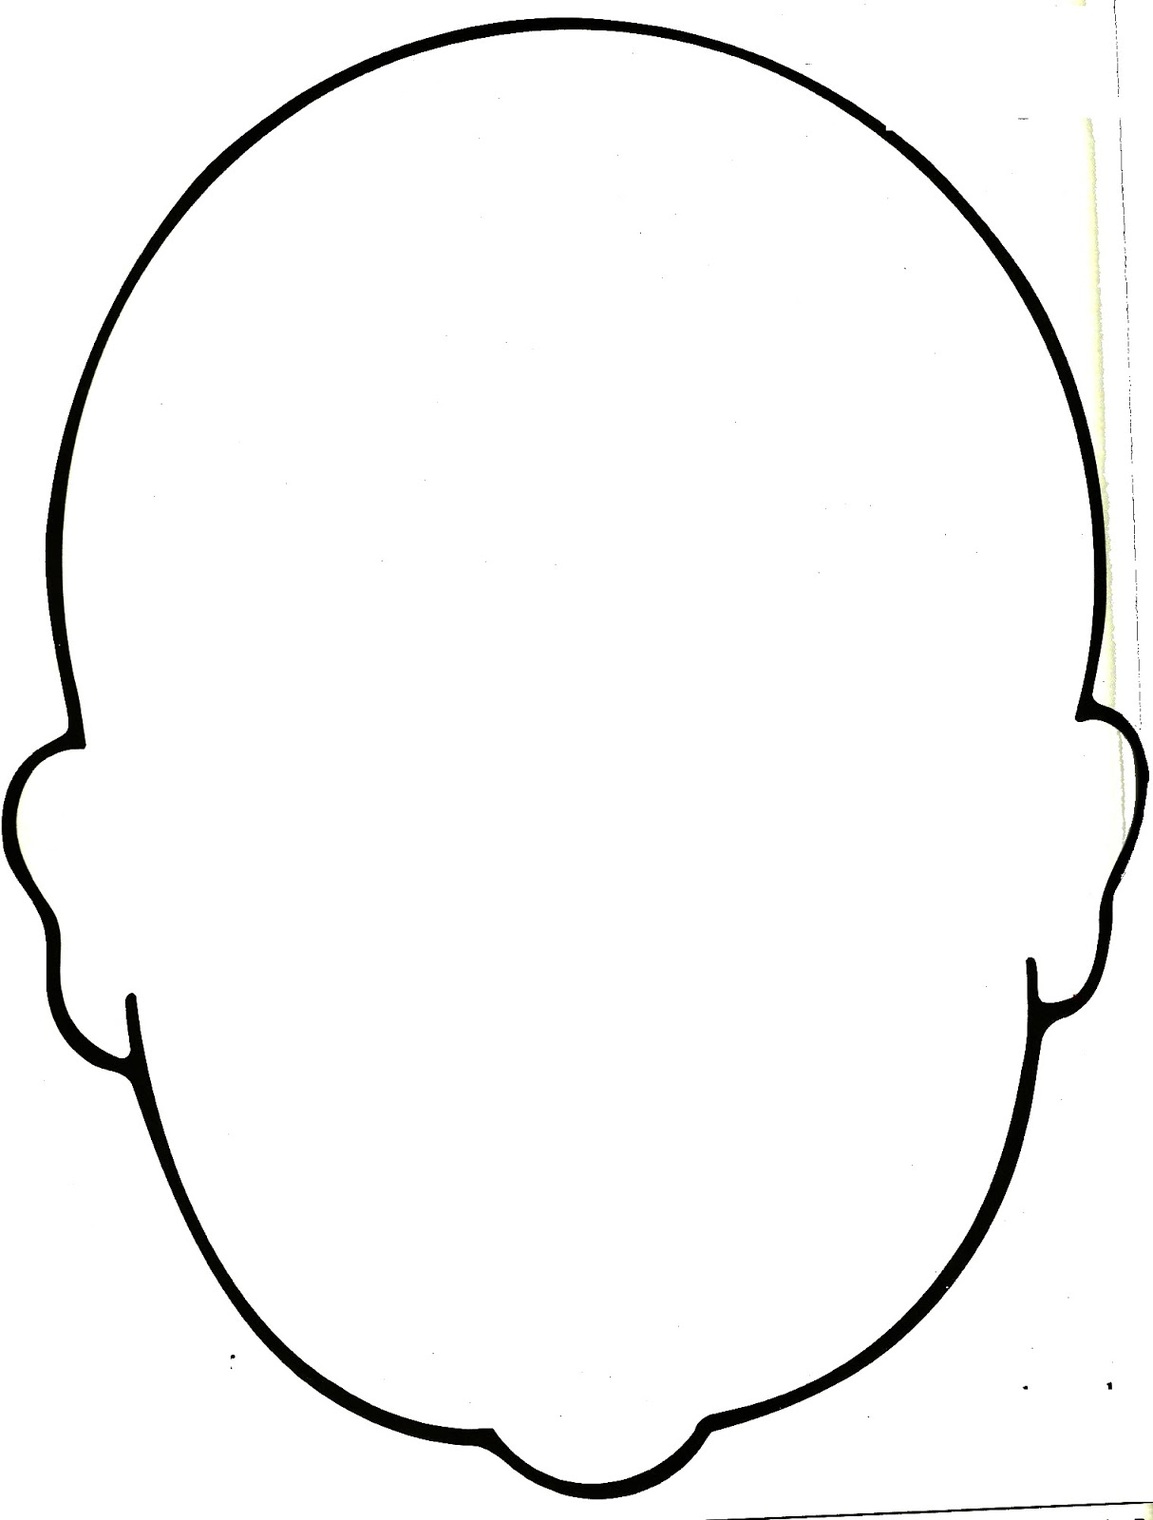 Face Outline - Blank Head Coloring Page